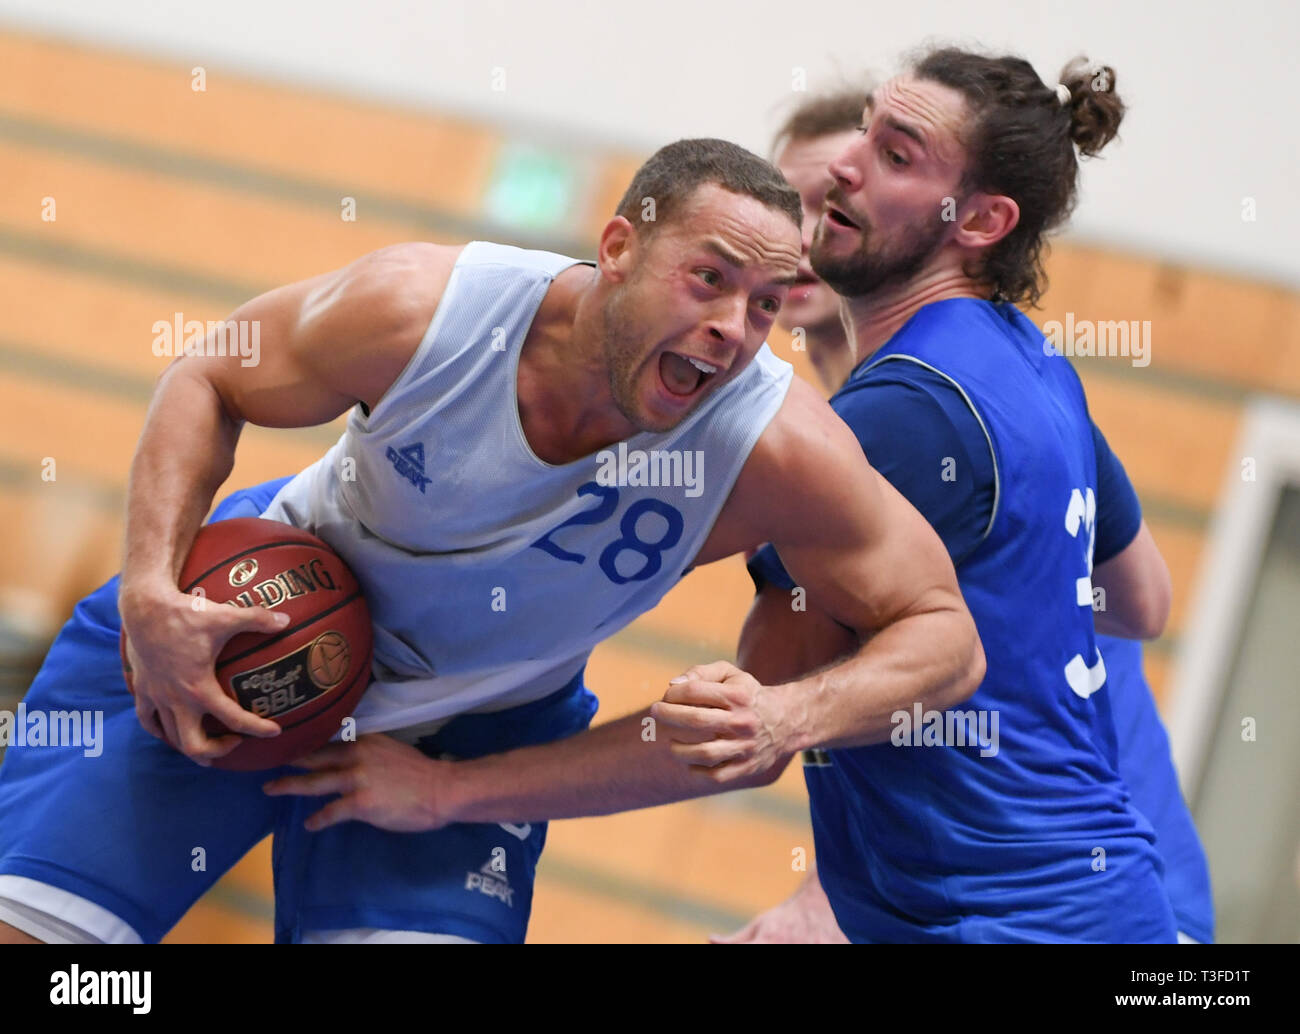 09 April 2019, Hessen, Frankfurt/Main: Andrej Mangold (l), "TV Bachelor",  is attacked by Marco Völler during the training of the basketball team  Fraport Skyliners. Mangold continues his professional career in Frankfurt.  Photo: